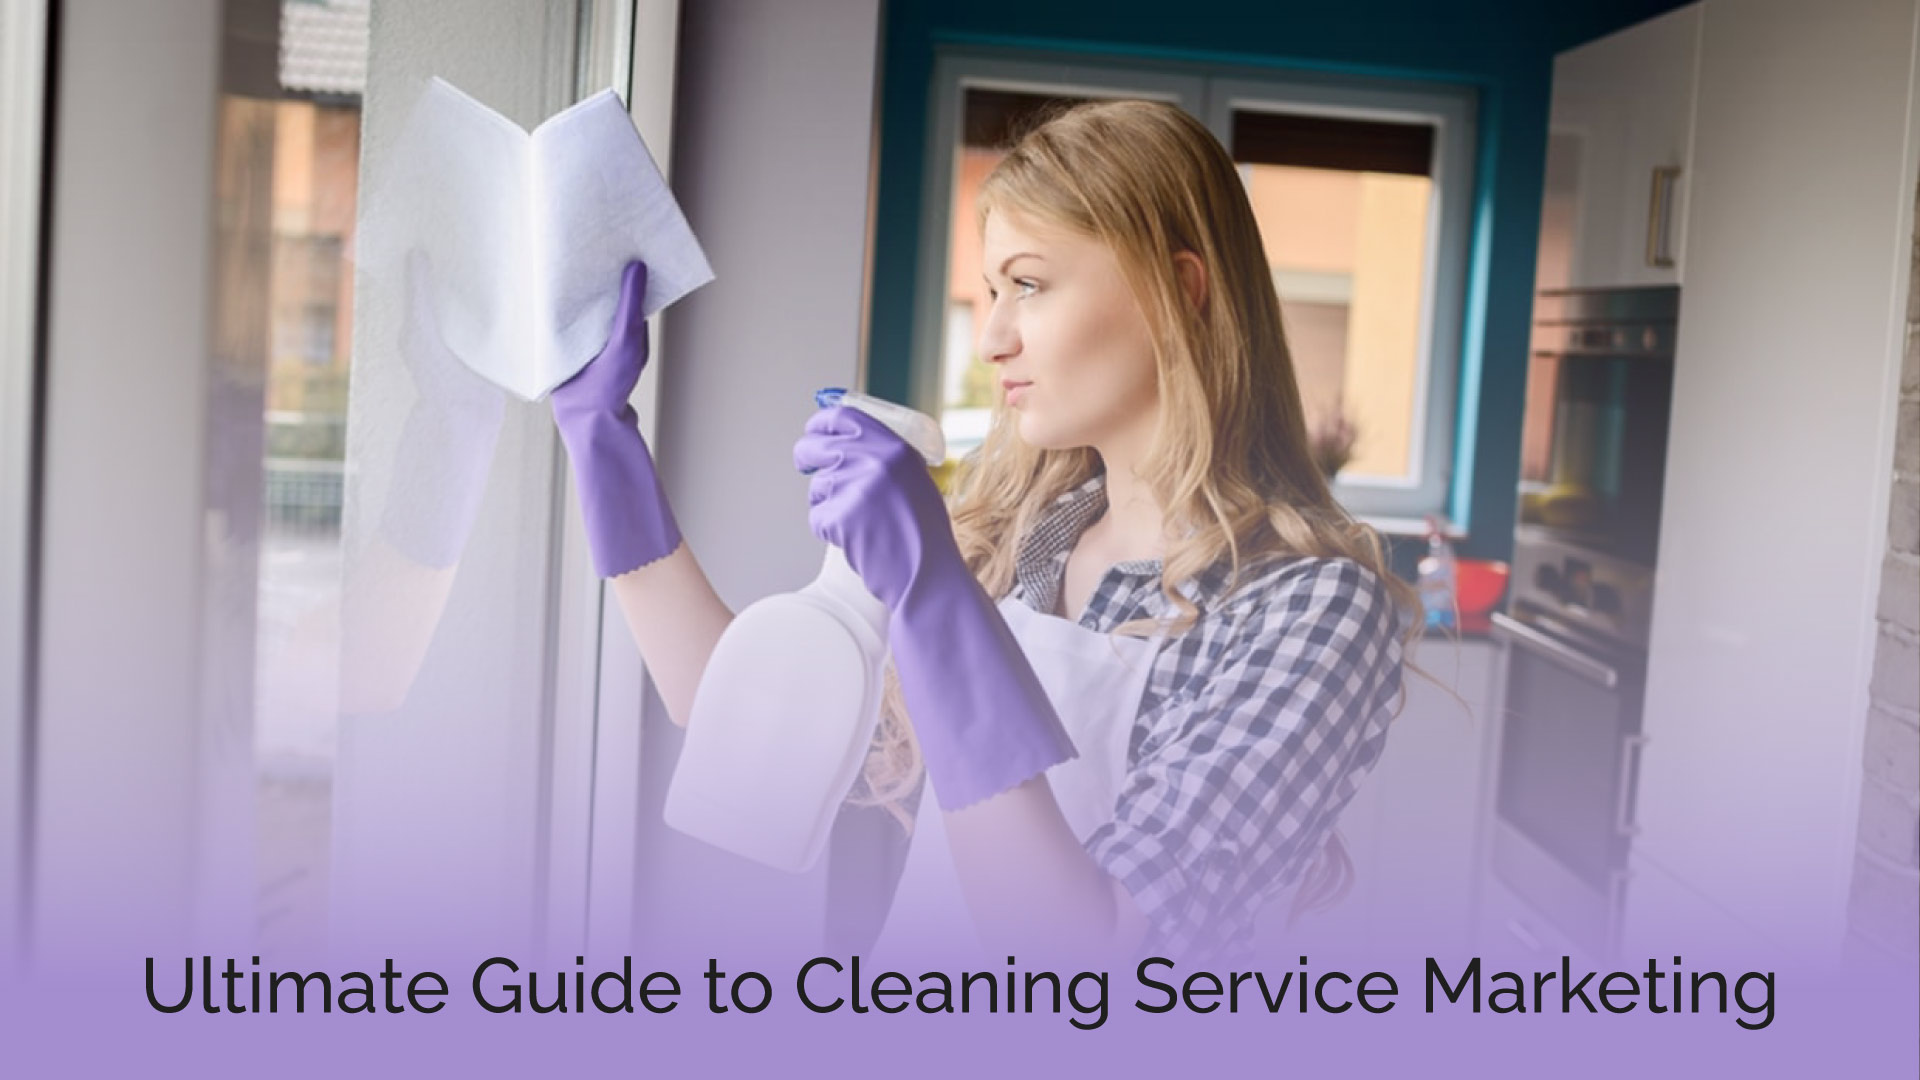 Cleaning service marketing